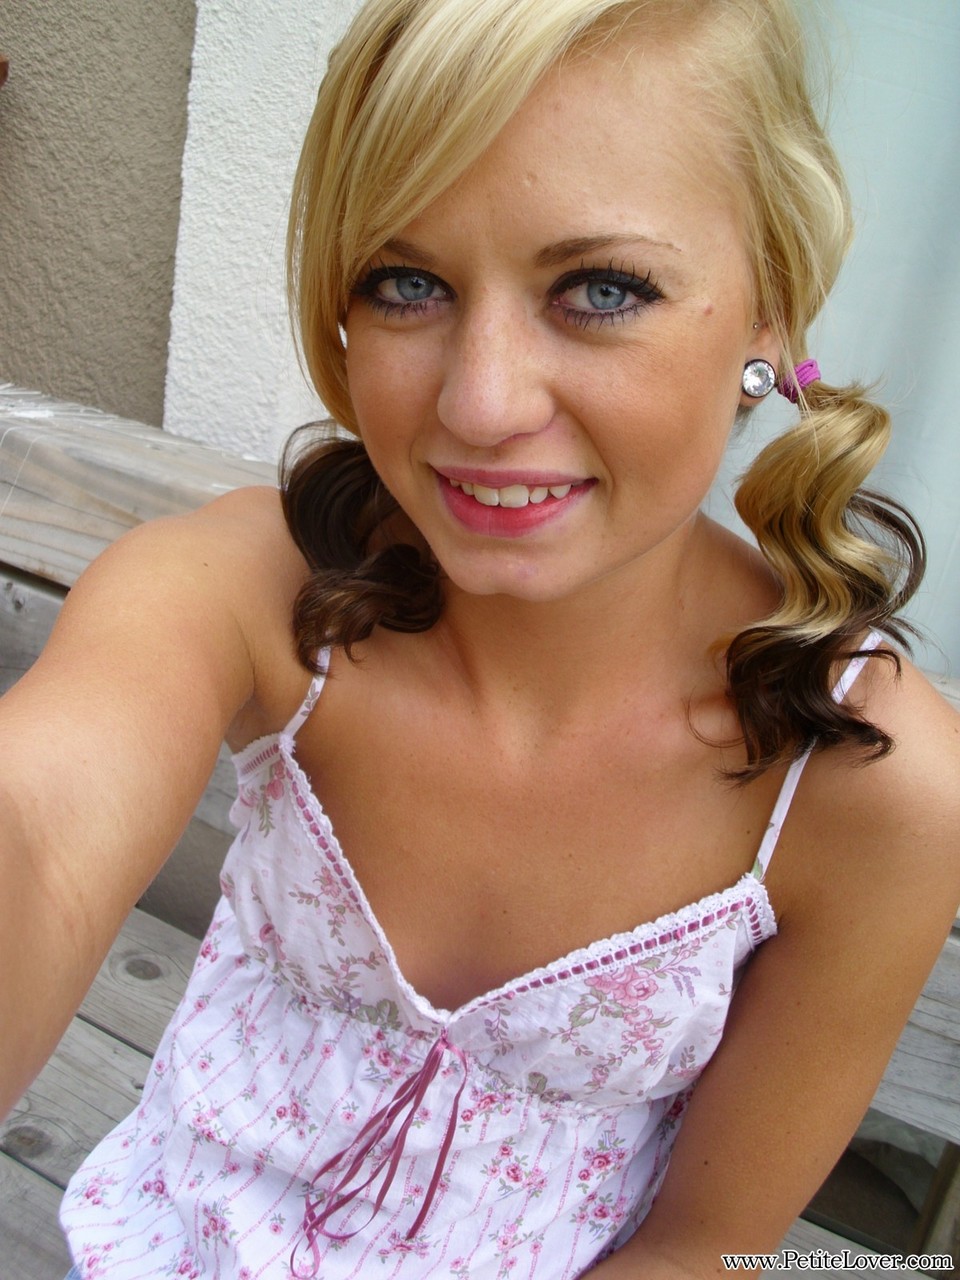 Cute blonde Tiff in pigtails showing off her wee small tits & tiny bald pussy Porno-Foto #428361803 | Petite Lover Pics, Tiff, Amateur, Mobiler Porno